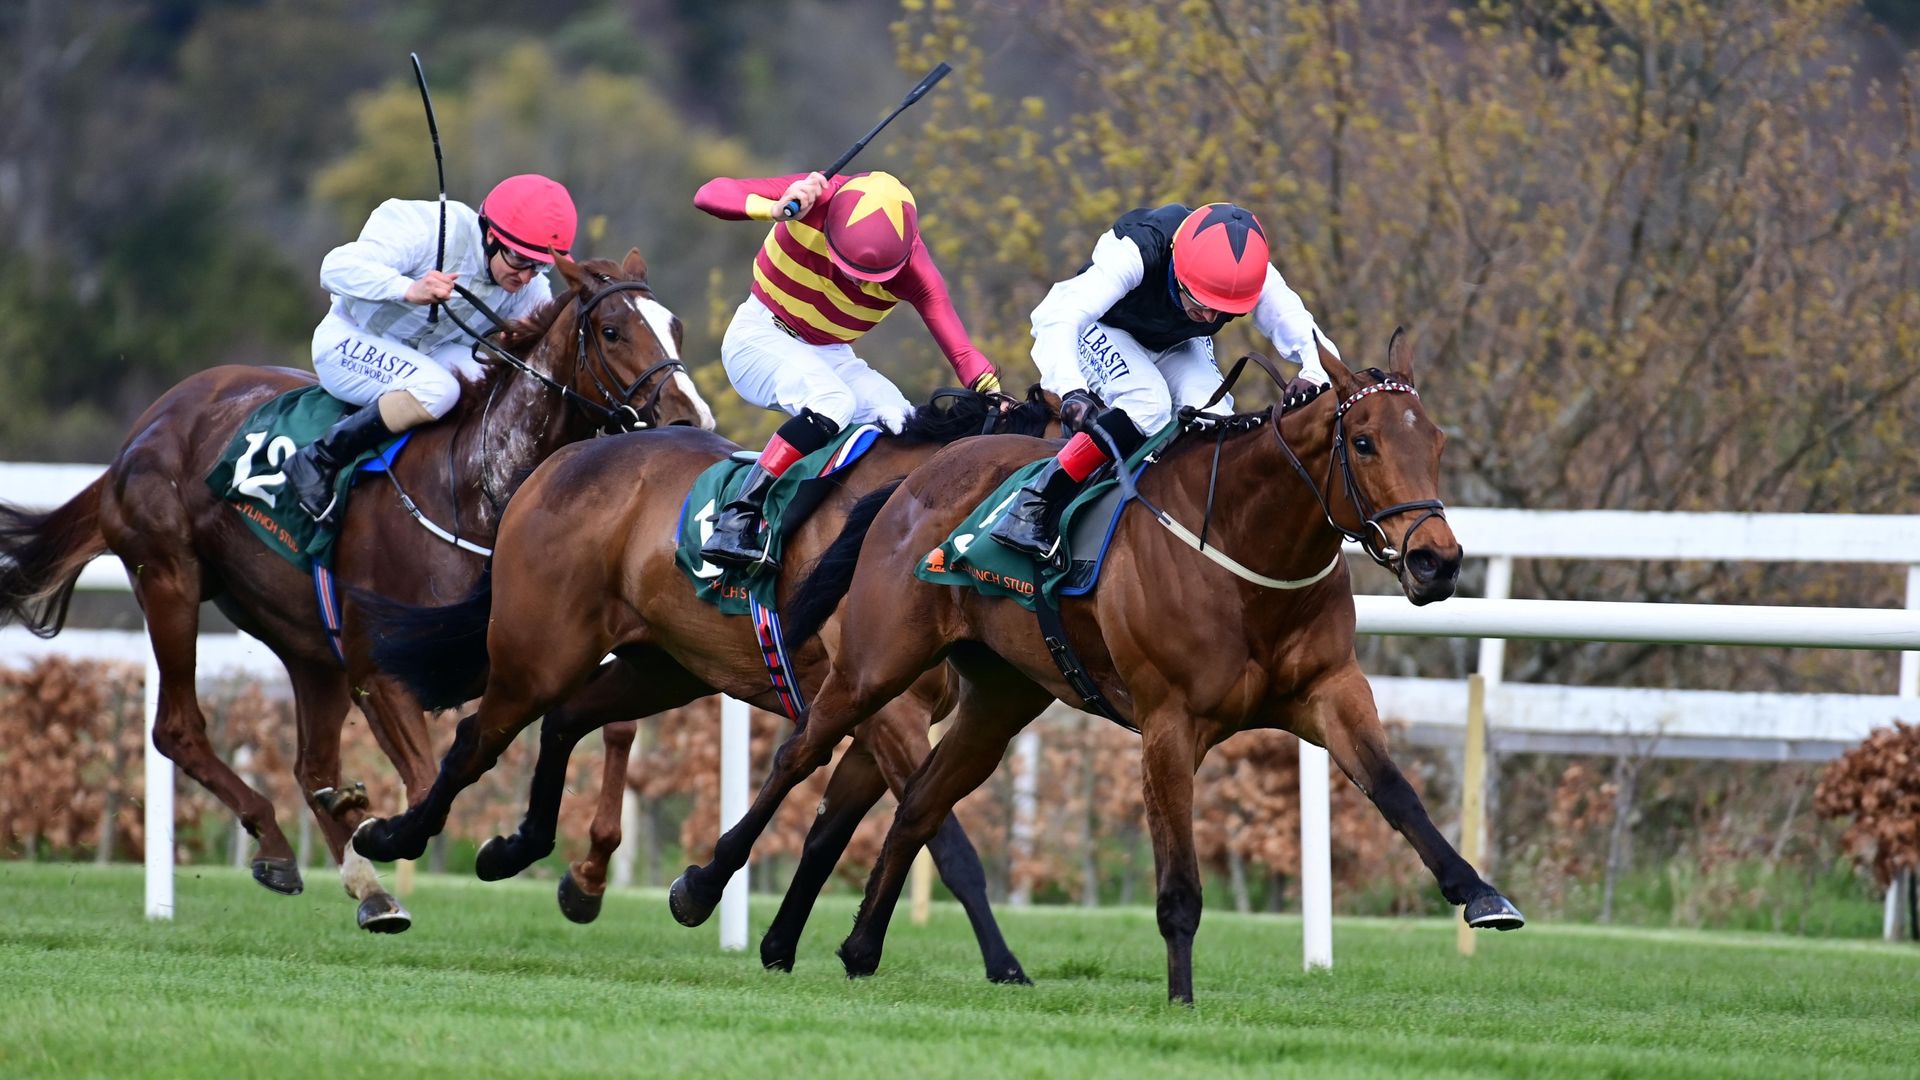 Traditional forged set for Coronation conflict at Royal AscotSkySports | Information